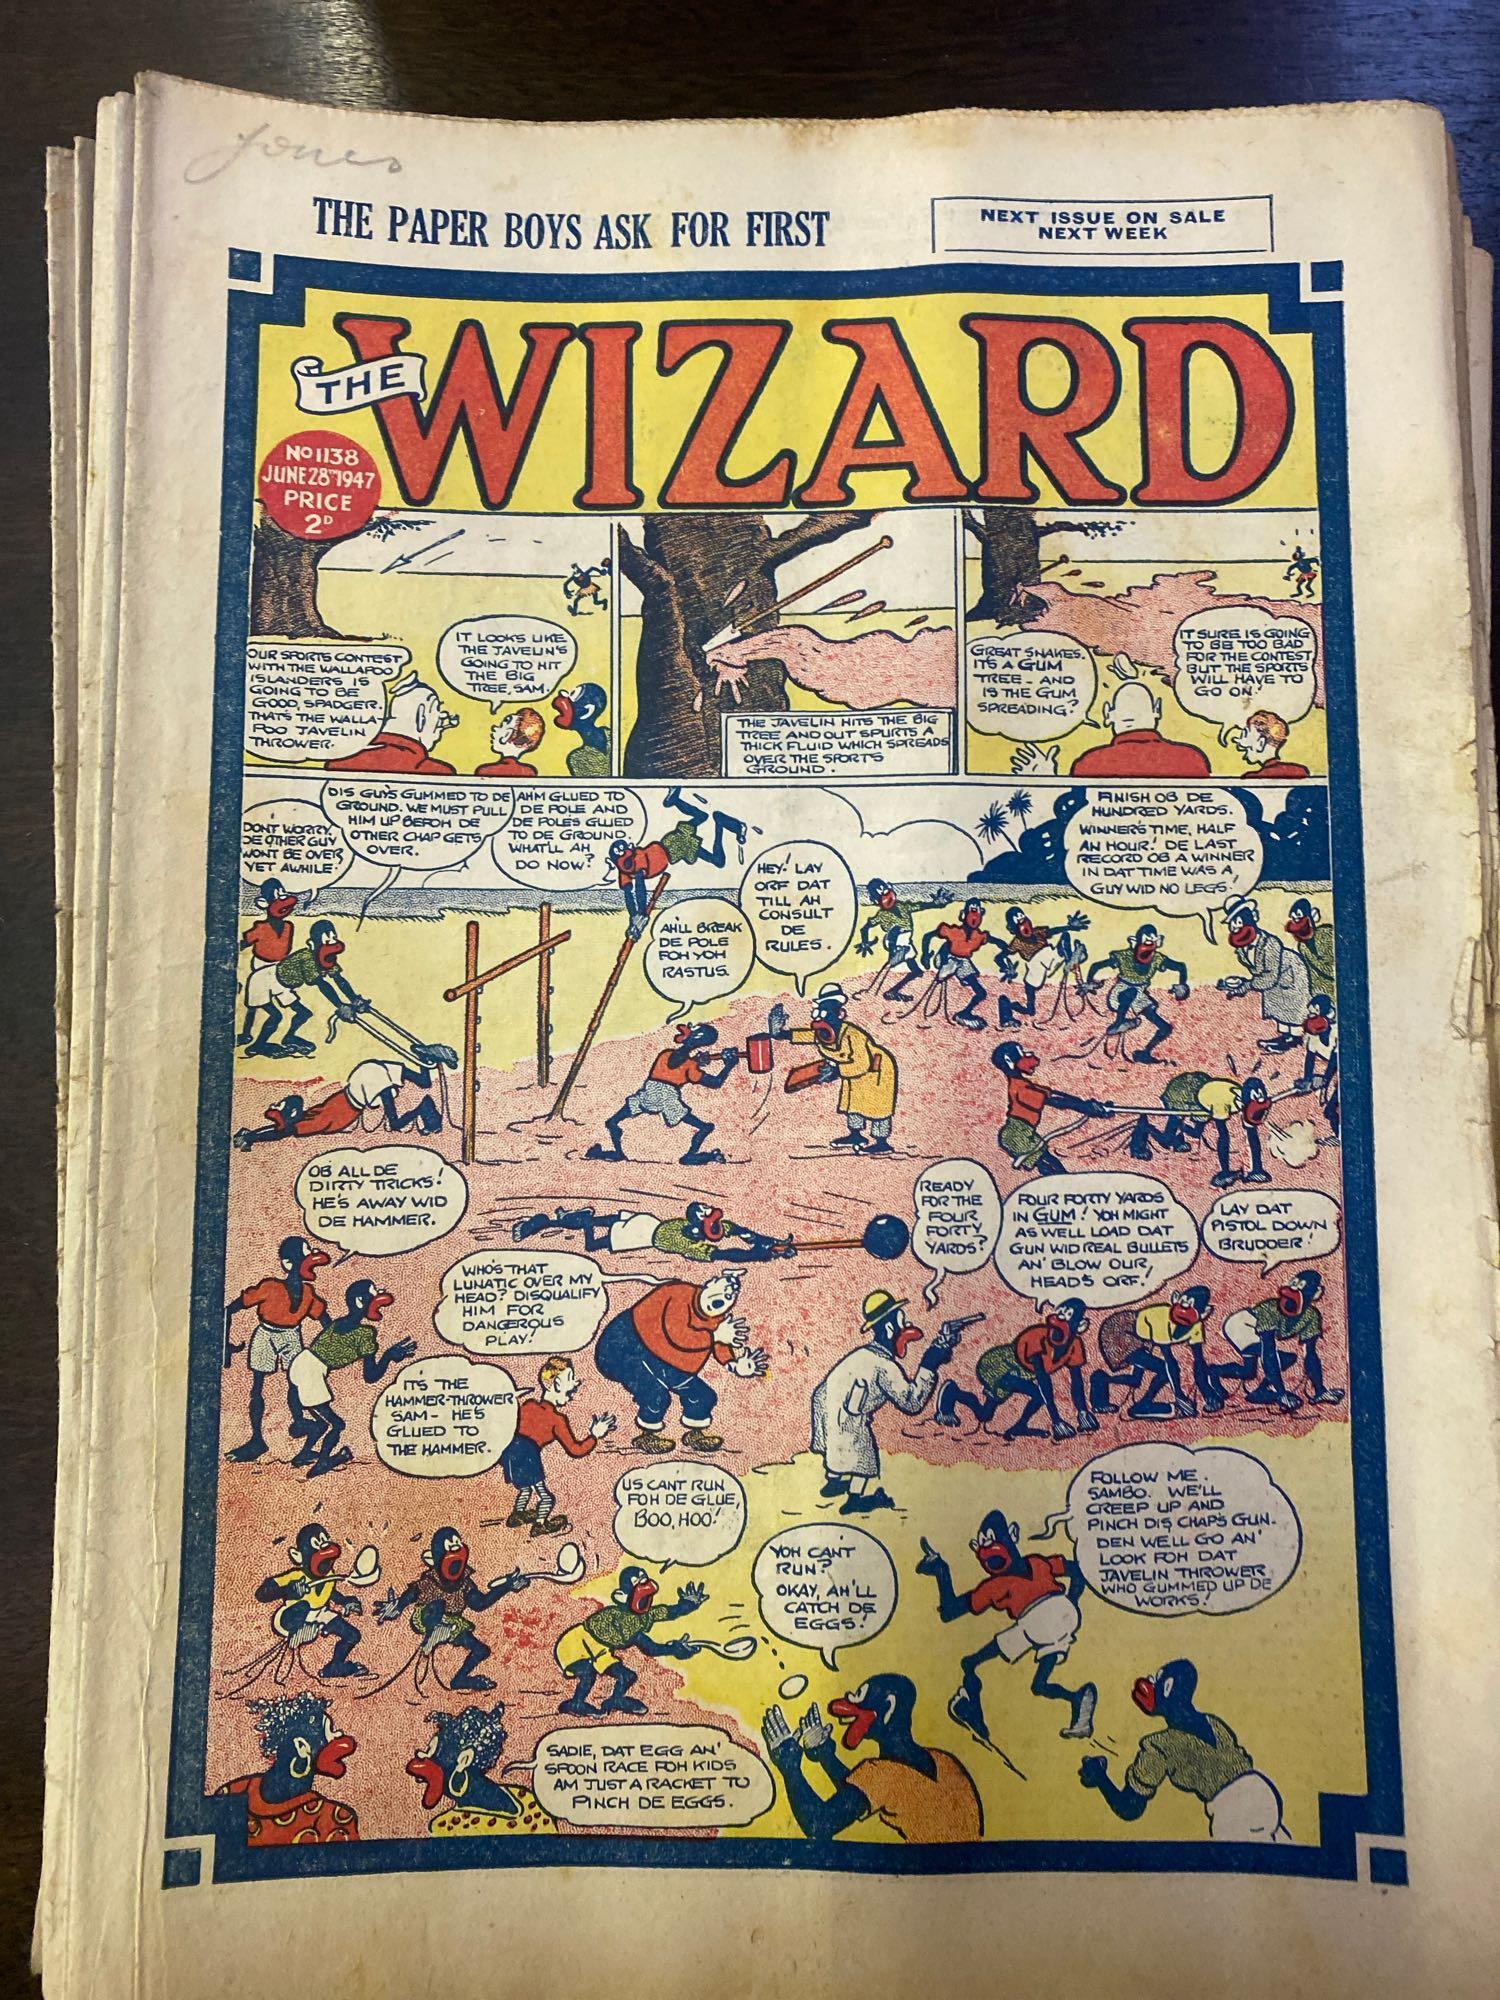 A quantity of vintage comics and childrens newspapers - Image 20 of 124